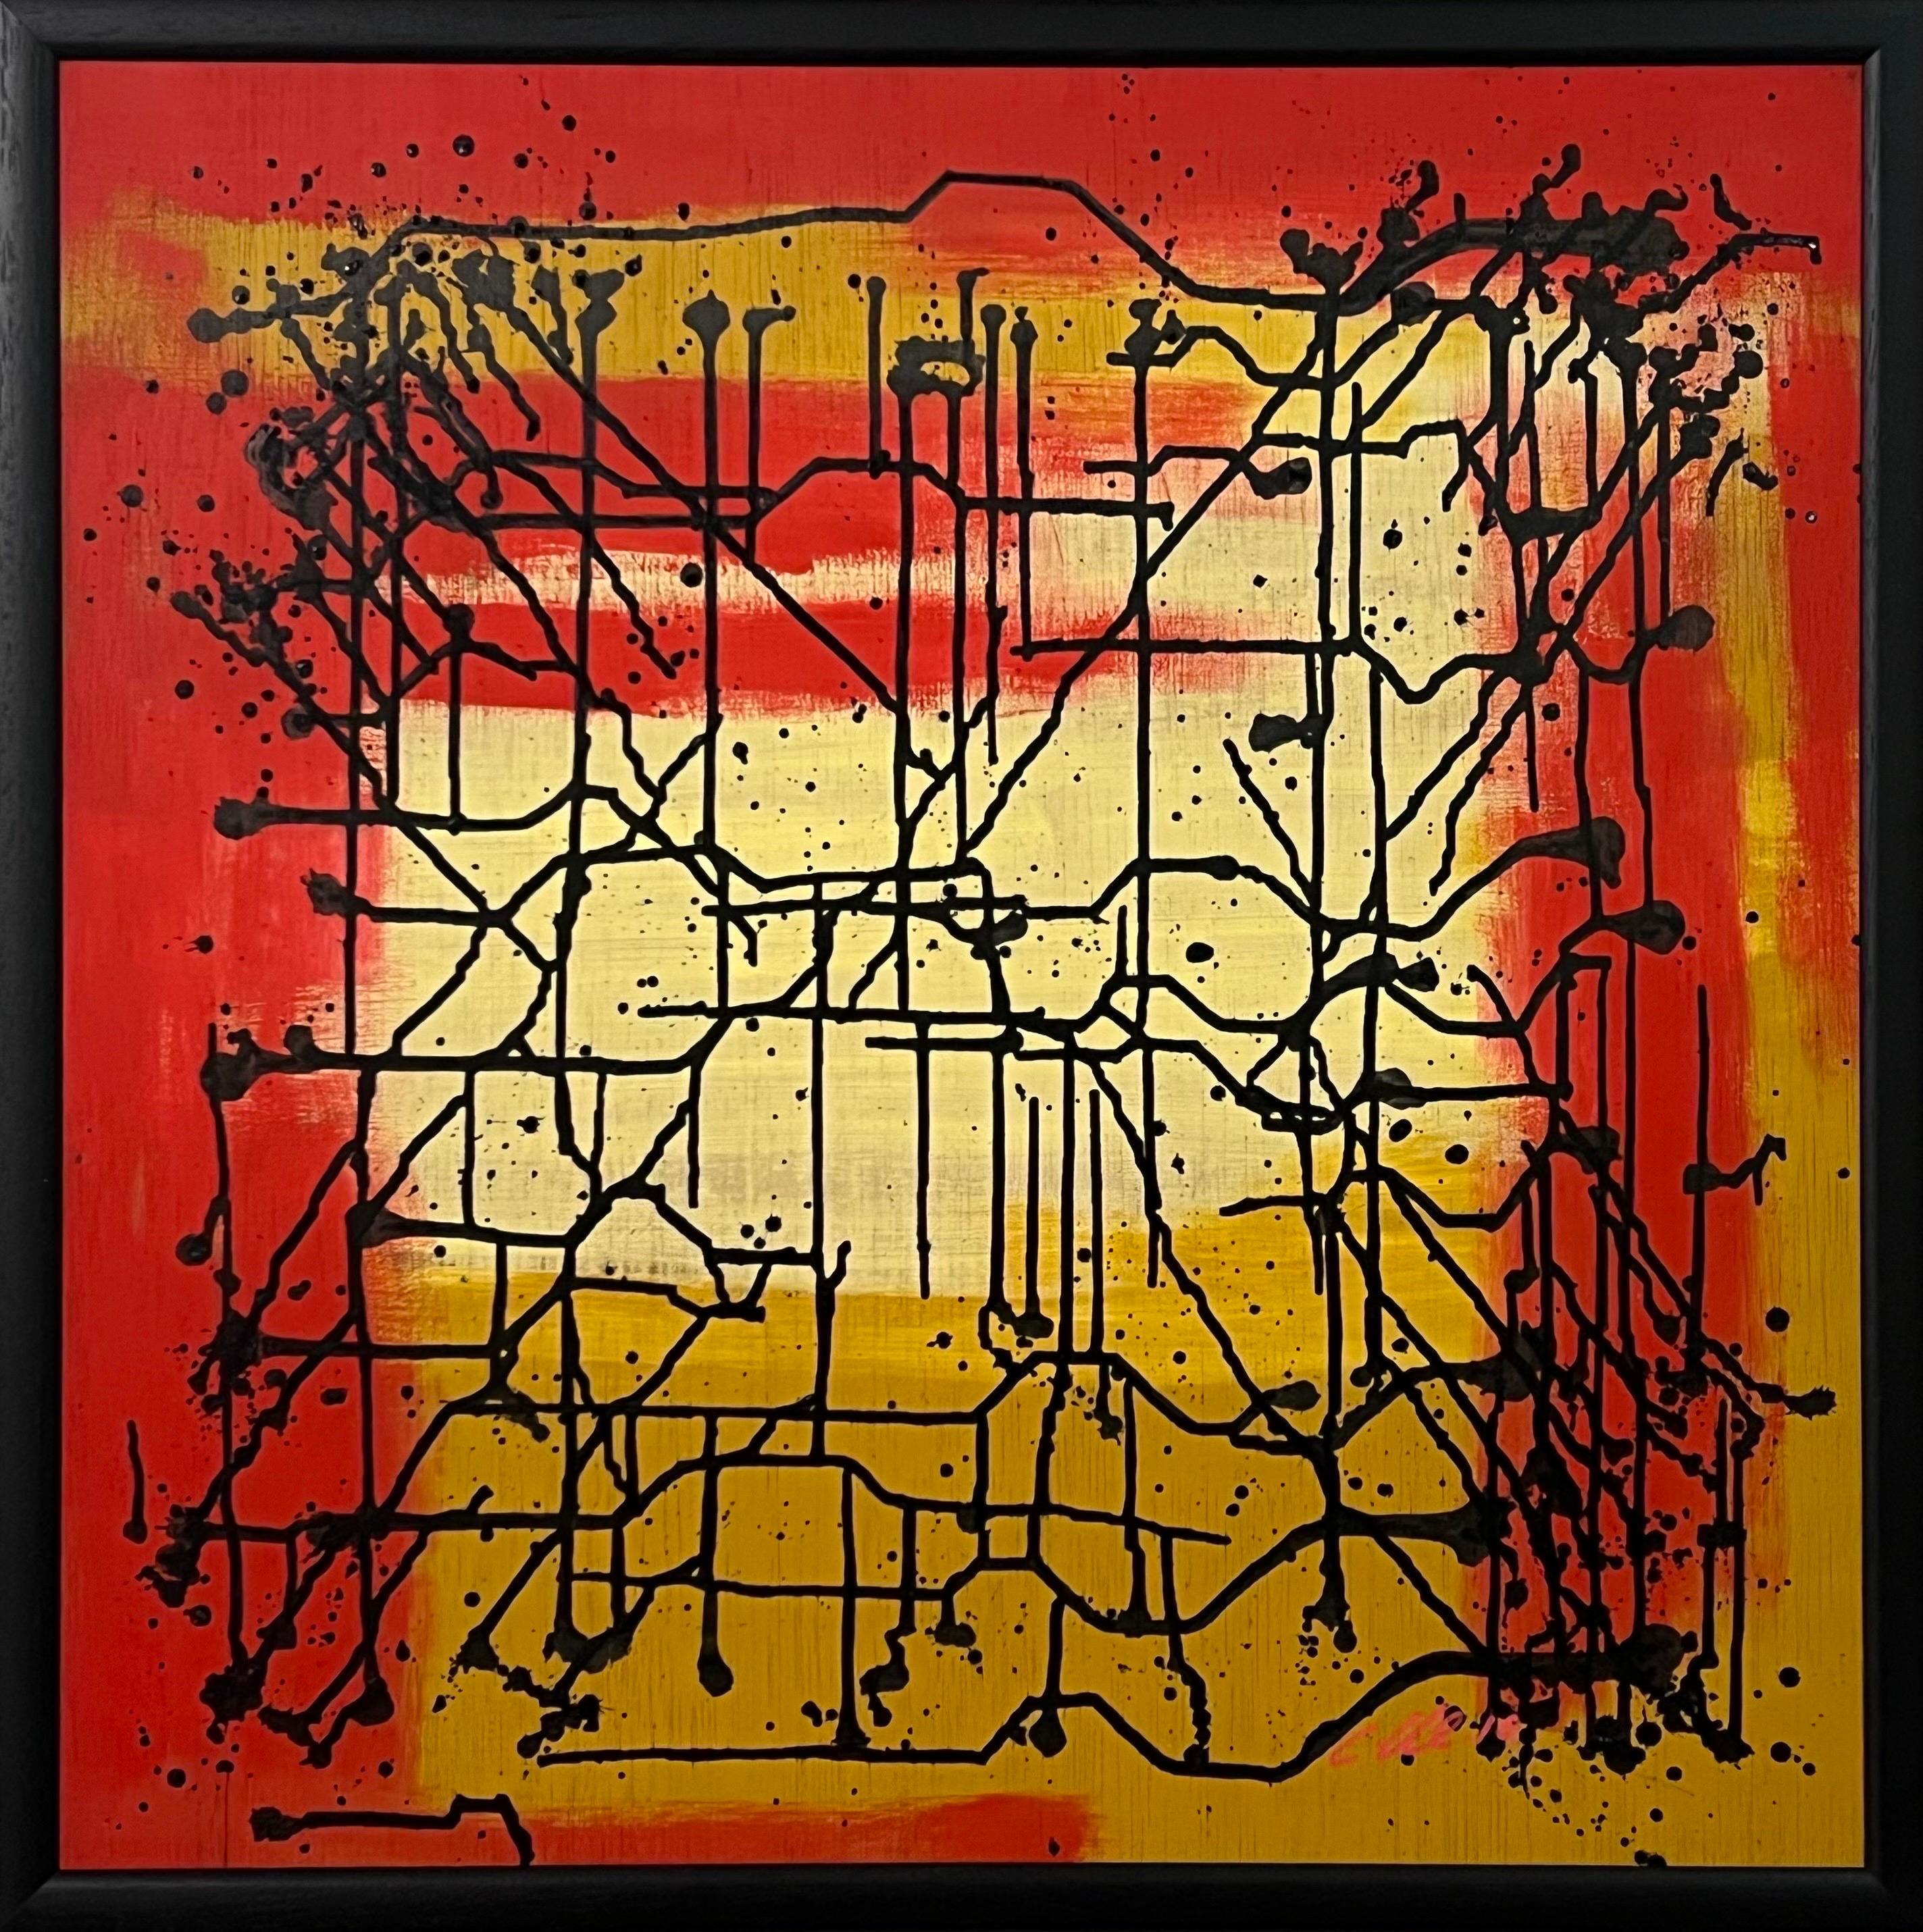 'Fractured Mind' - Abstract Painting on Board by British Graffiti Artist